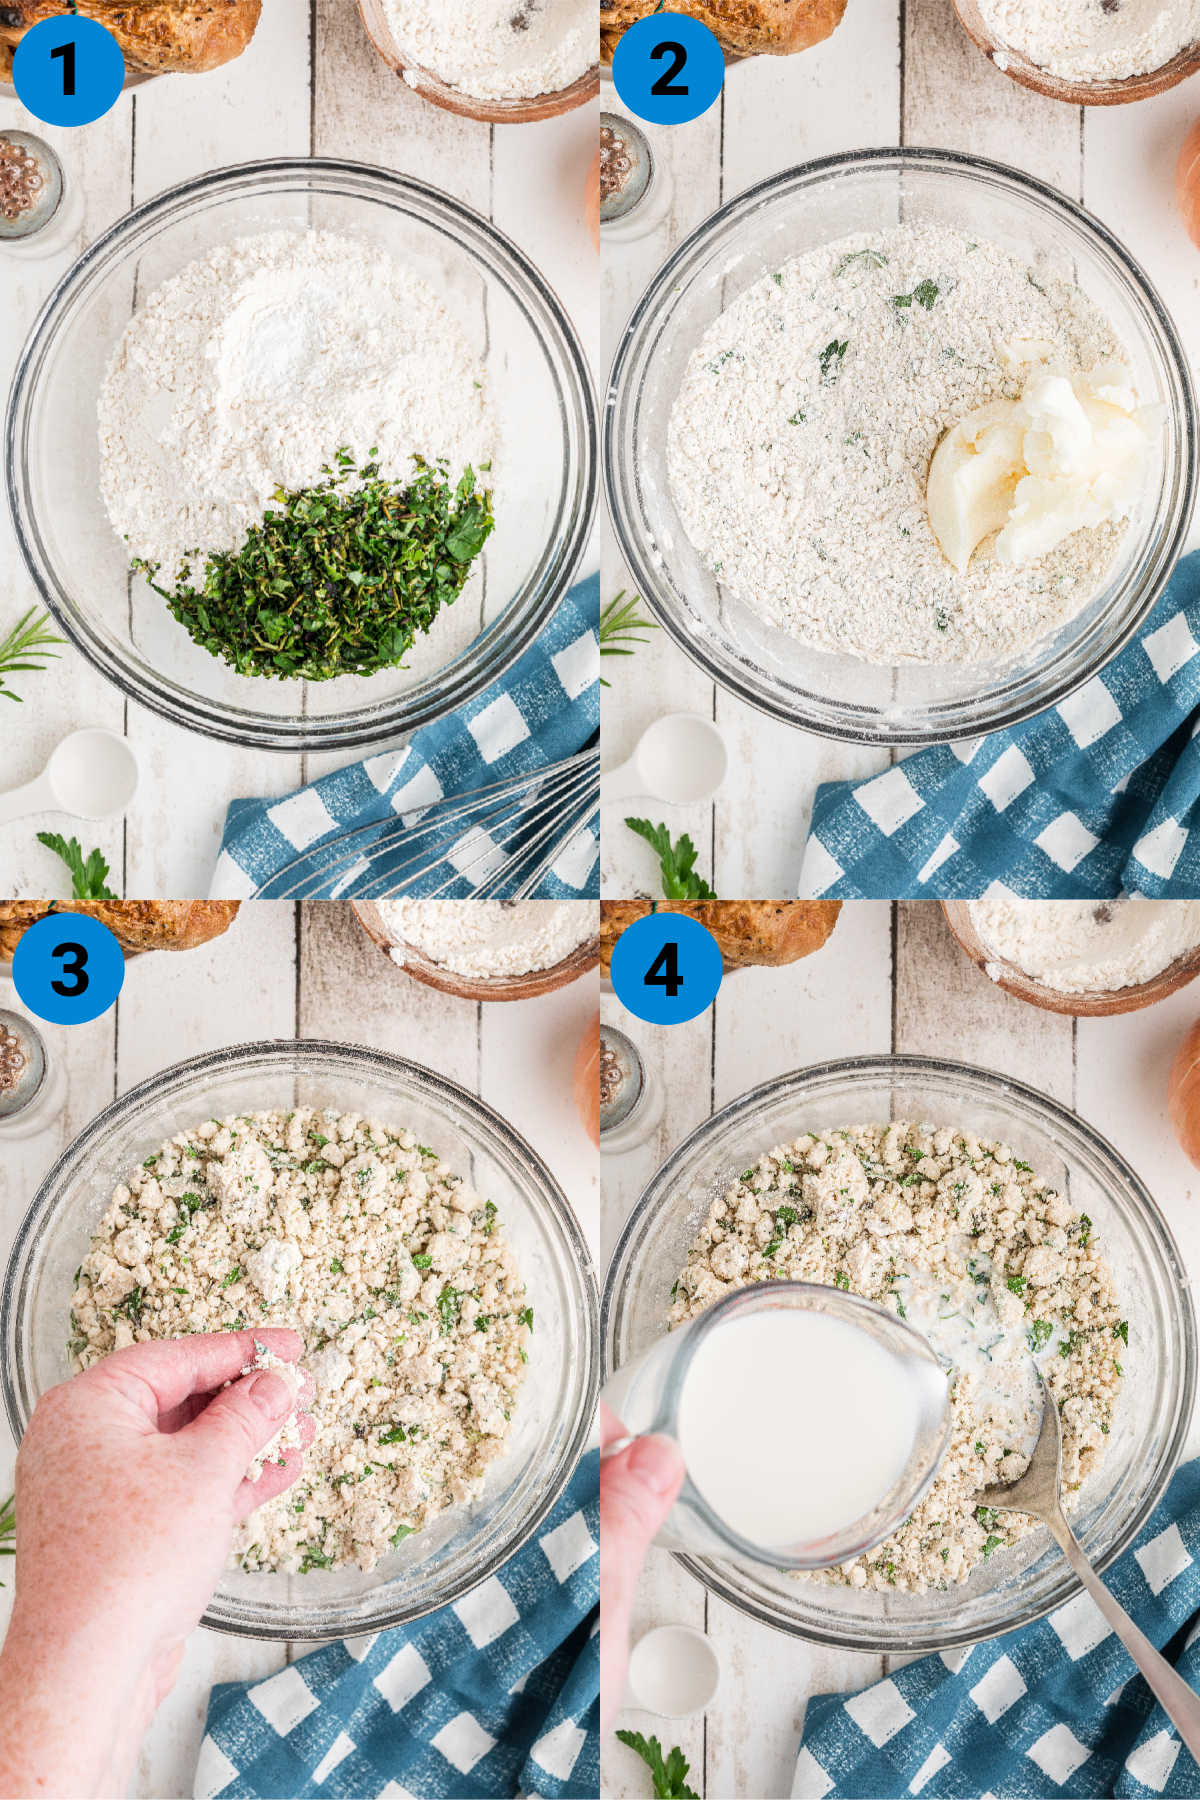 A collage of four images showing how to make chicken dumpling soup, recipe steps 1-4.